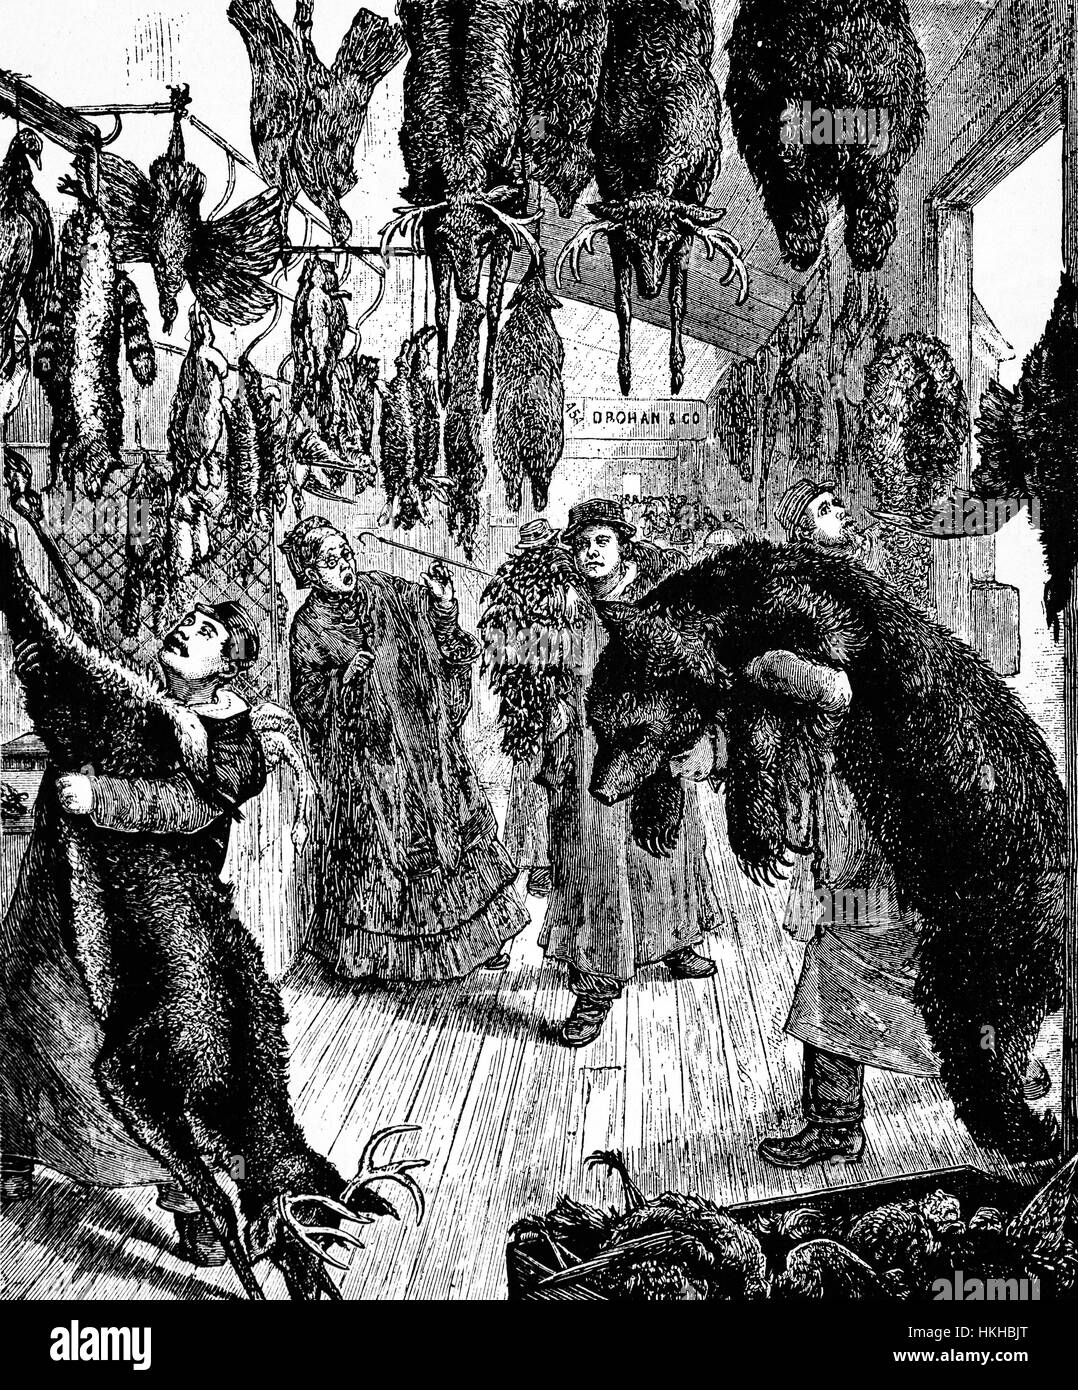 1879: Preparing fur skins or pelts for holiday banquets in  Washington Market. Started in 1812 it operated on the site that was to become the World Trade Center. New York City, United States of America. Stock Photo